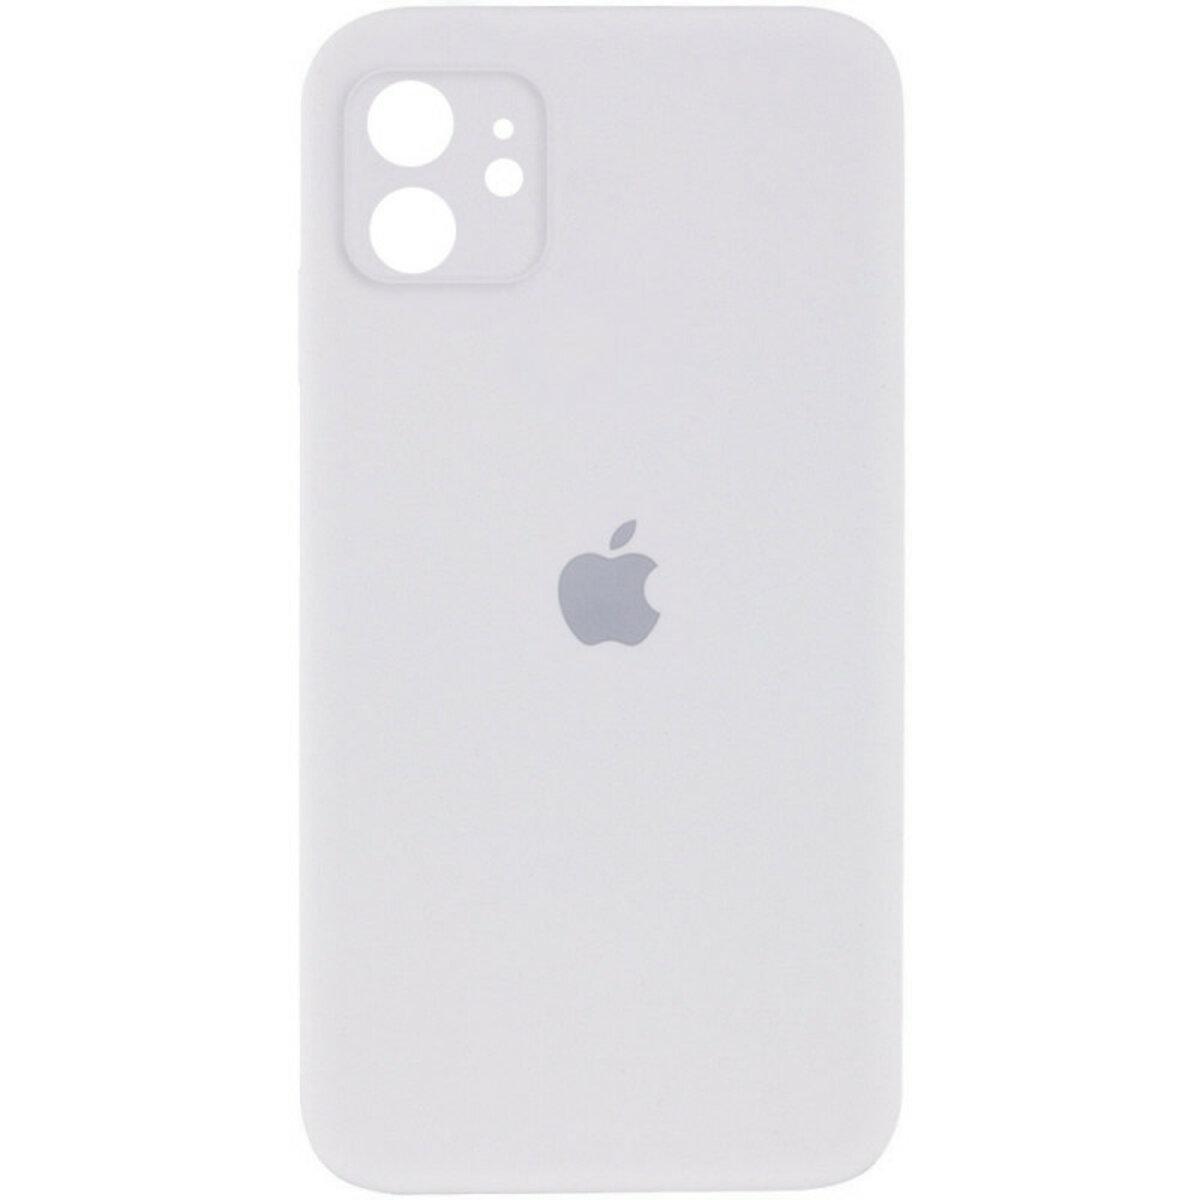 Чохол для смартфона Silicone Full Case AA Camera Protect for Apple iPhone 11 8,White